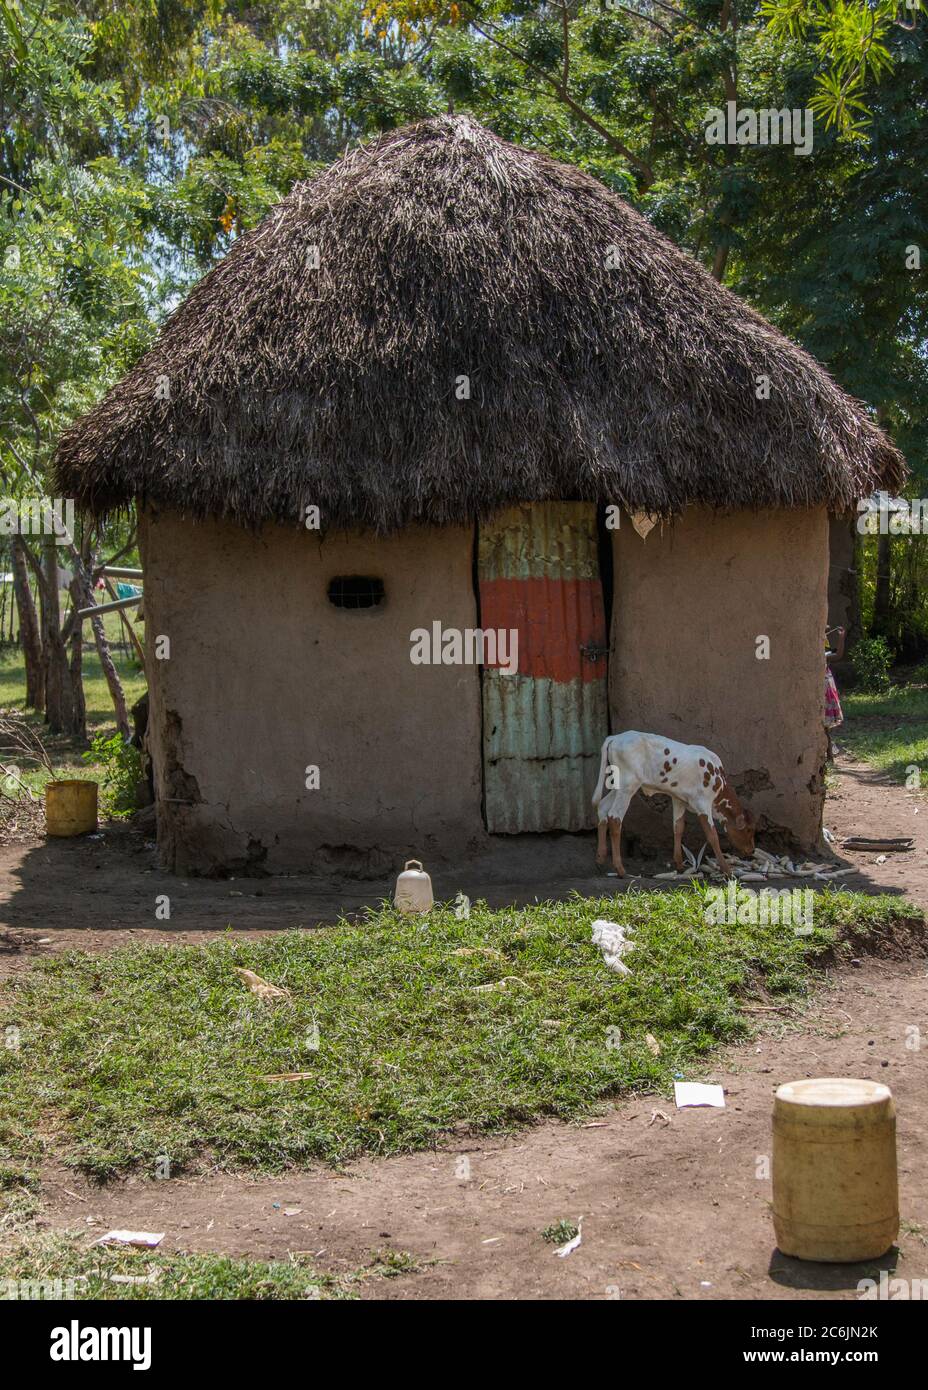 A traditional mud hut with a thatched roof in a rural village near Ahero, Kenya Stock Photo